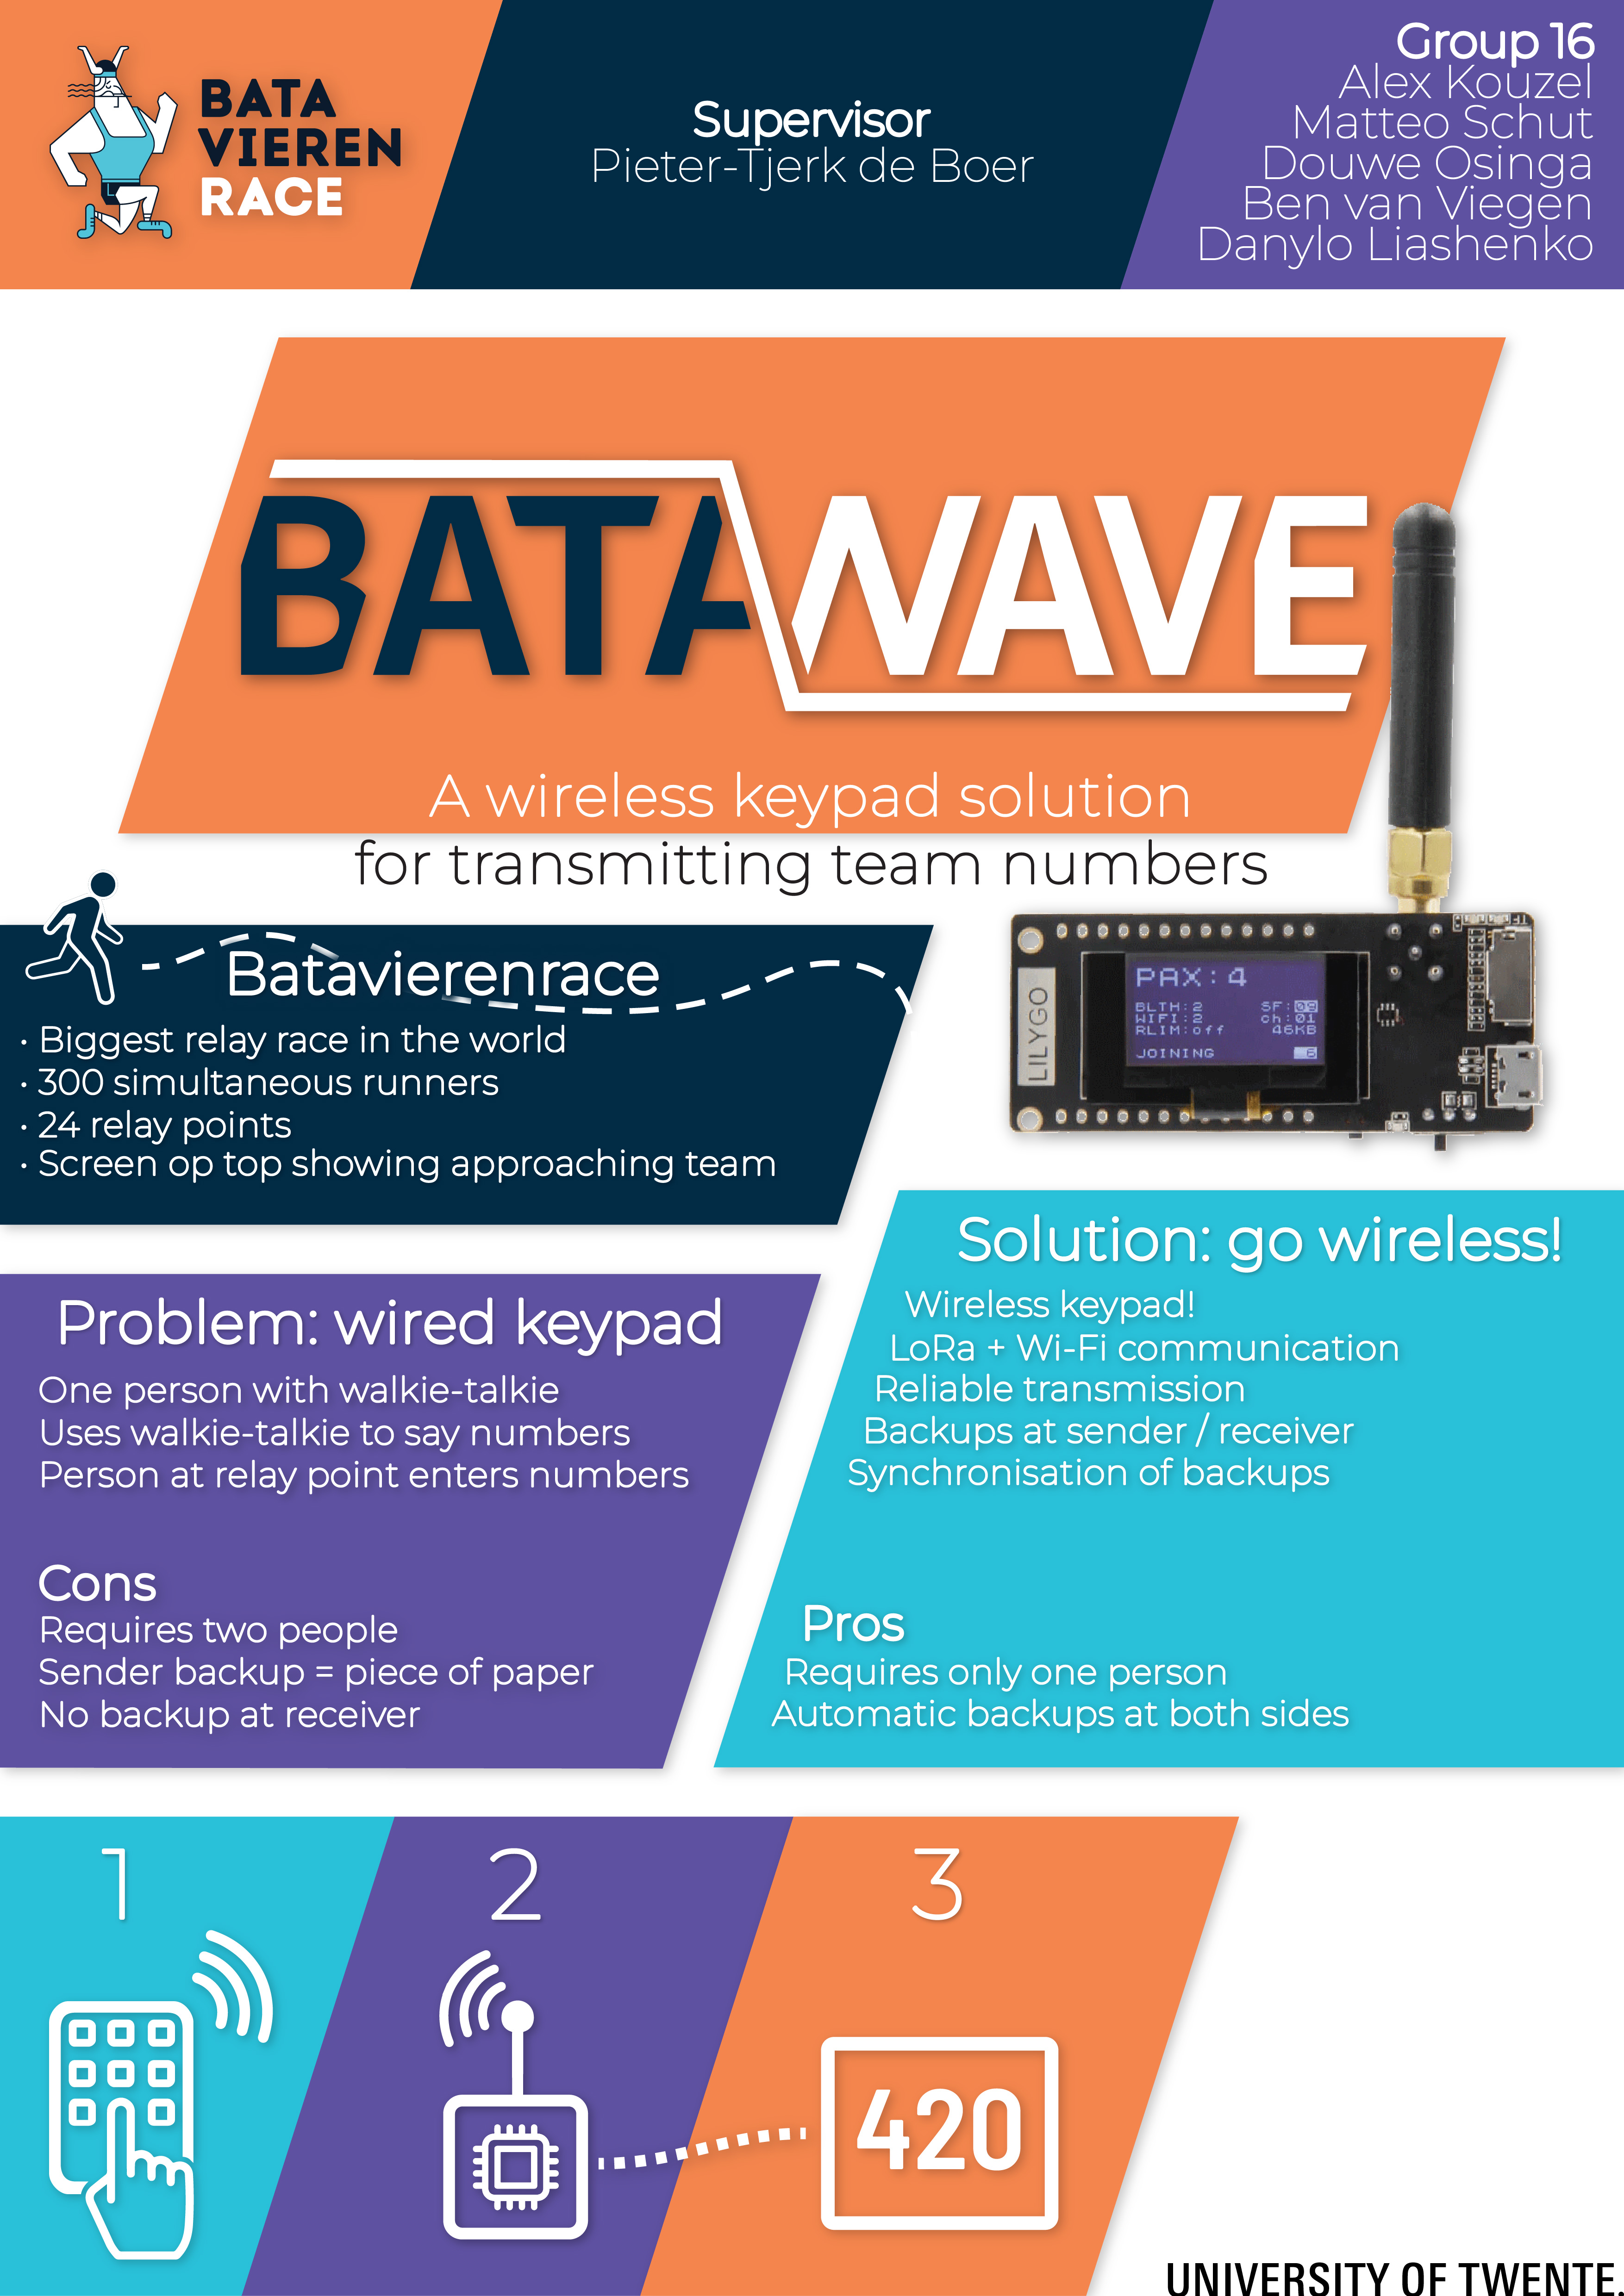 Poster, BATA_WAVE: A Wireless Keypad Solution for the Batavierenrace